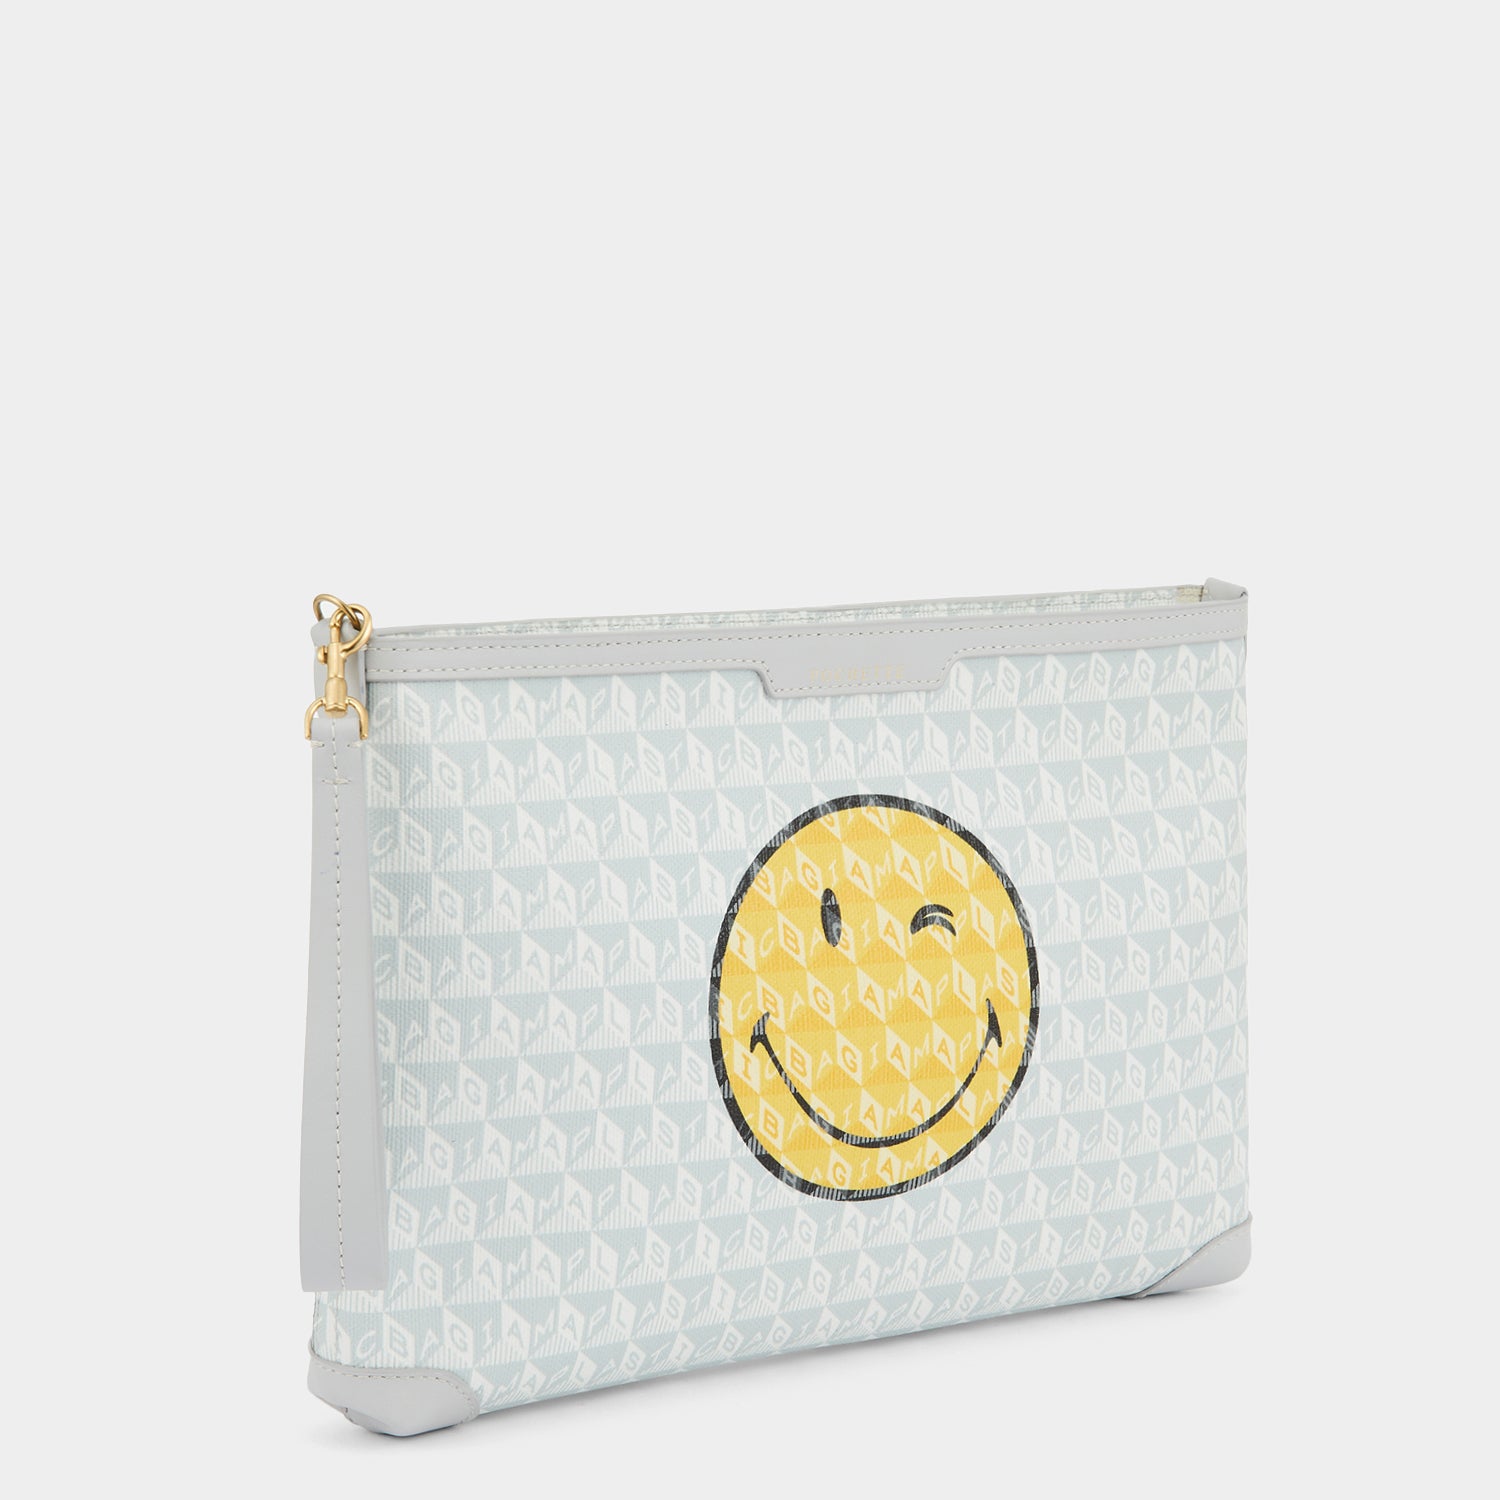 「I AM A Plastic Bag』ウィンク ポシェット -

                  
                    Recycled Coated Canvas in Frost -
                  

                  Anya Hindmarch JP
